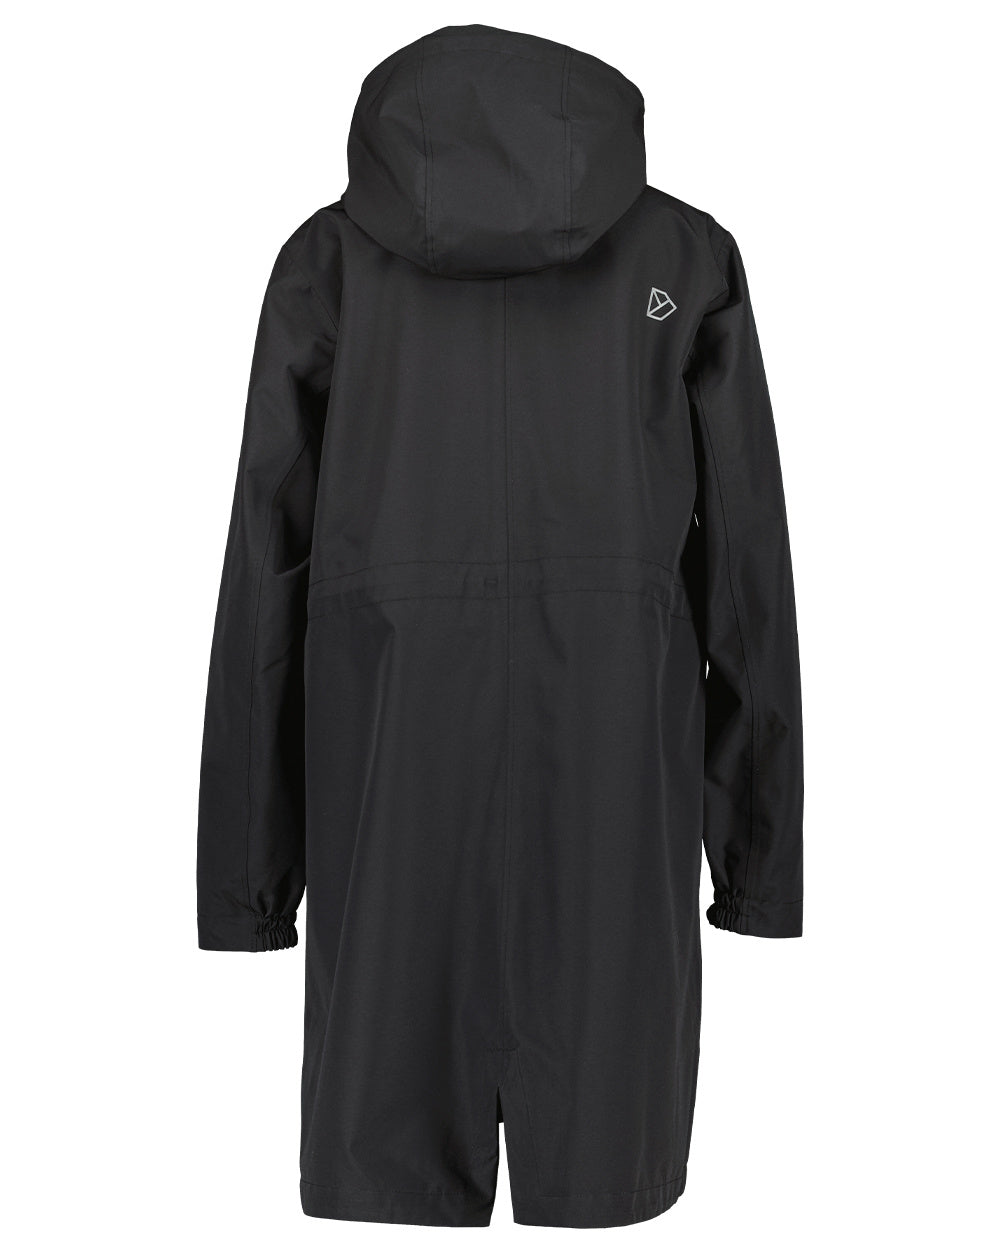 Black Coloured Didriksons Marta Womens Parka 3 On A White Background 